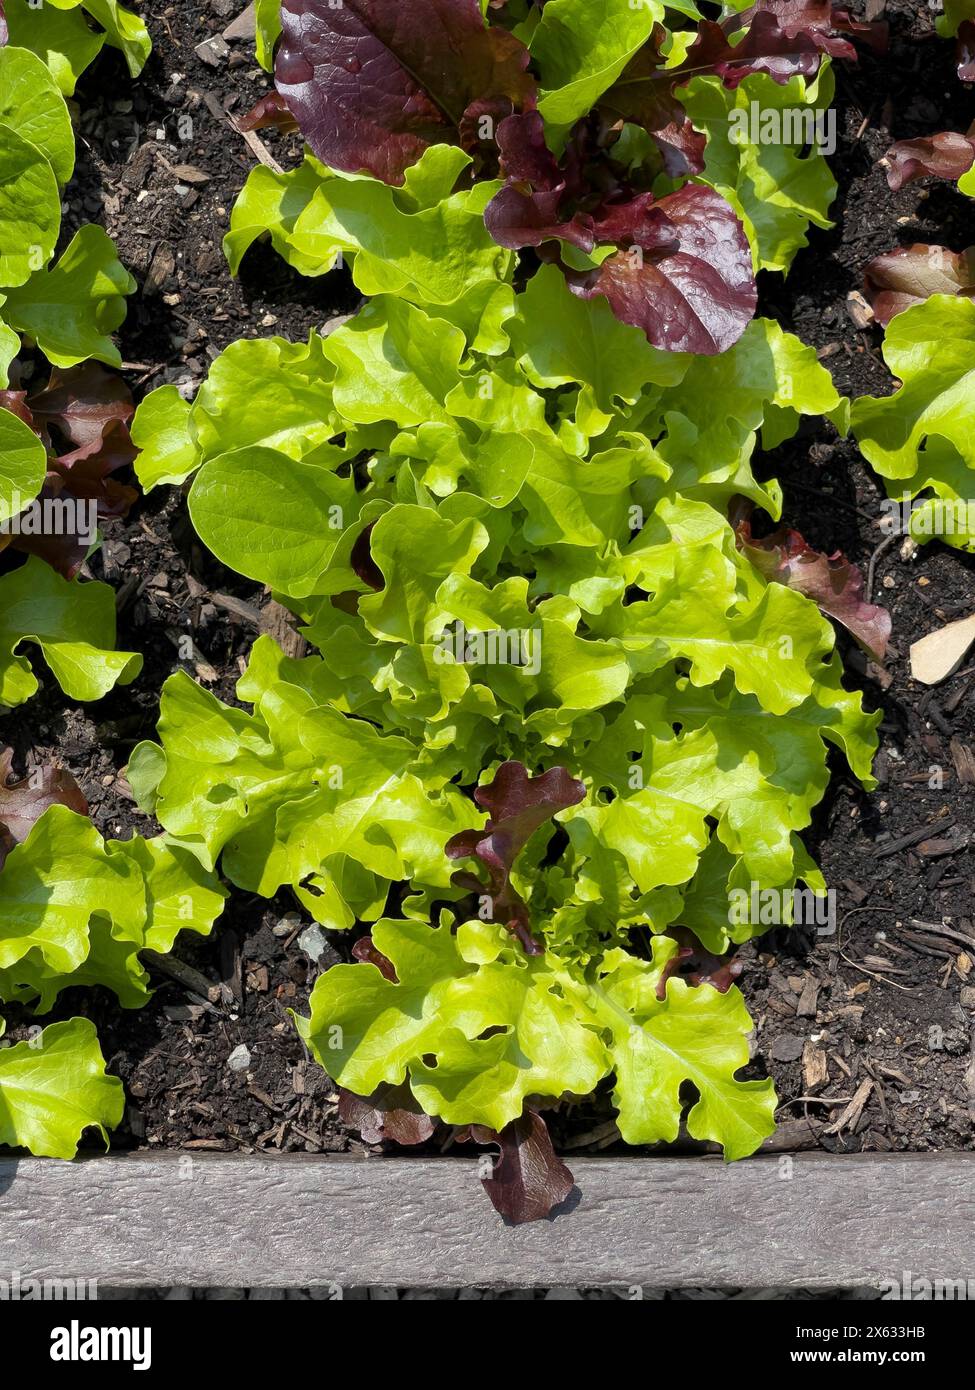 'All Star gourmet' salad leaves lettuce growing in a UK allotment. Stock Photo